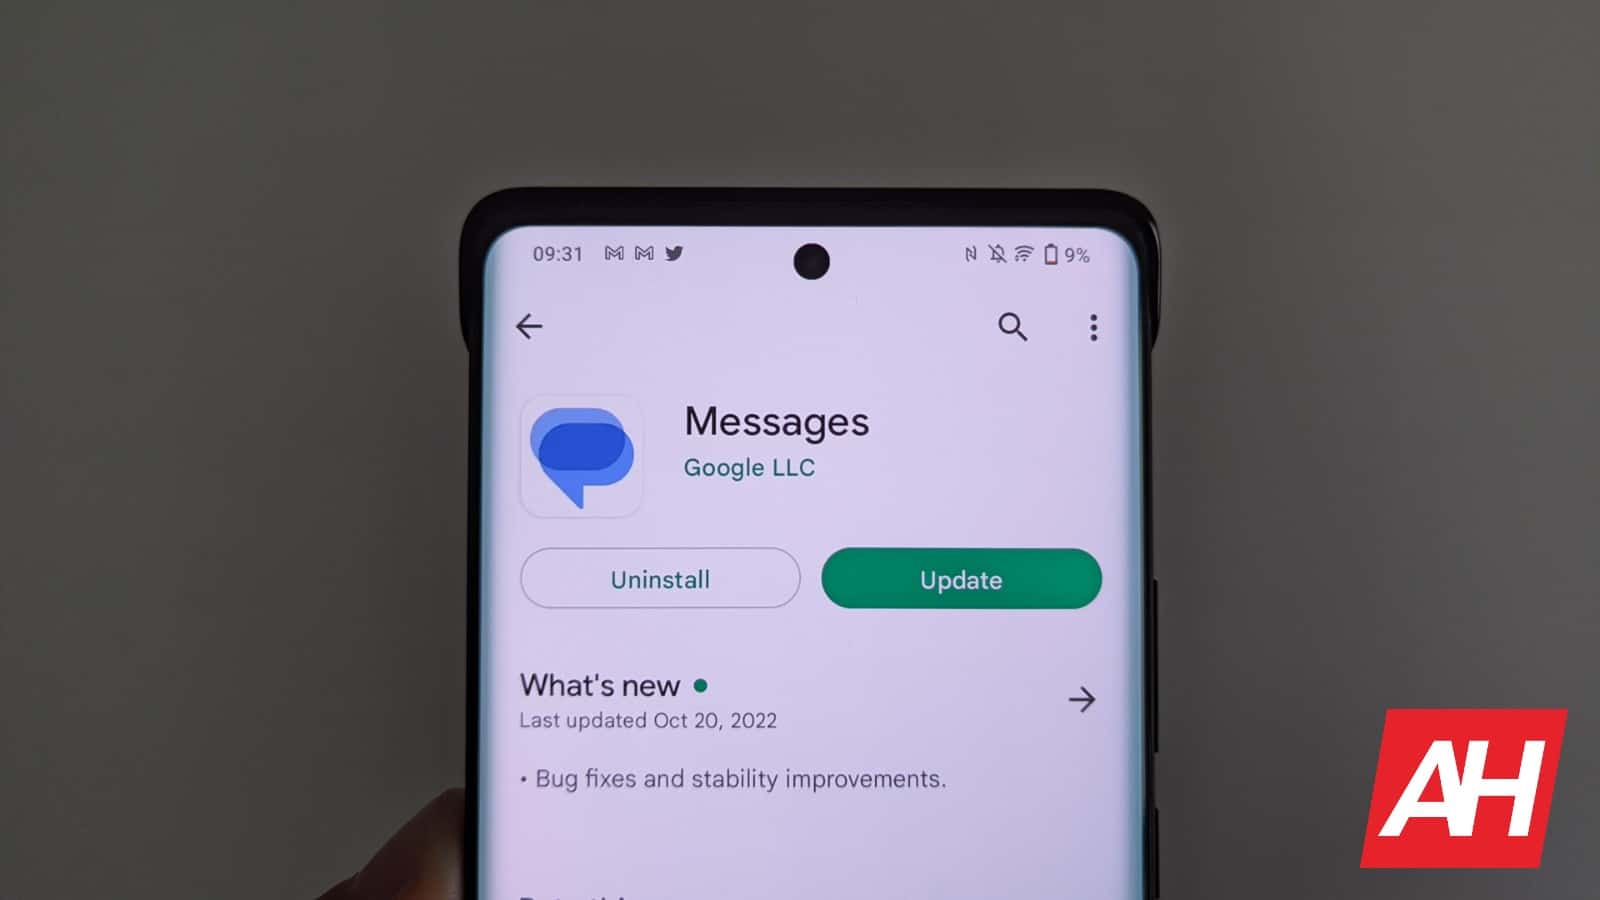 Do you like Google Messages? Well, you can let the company know